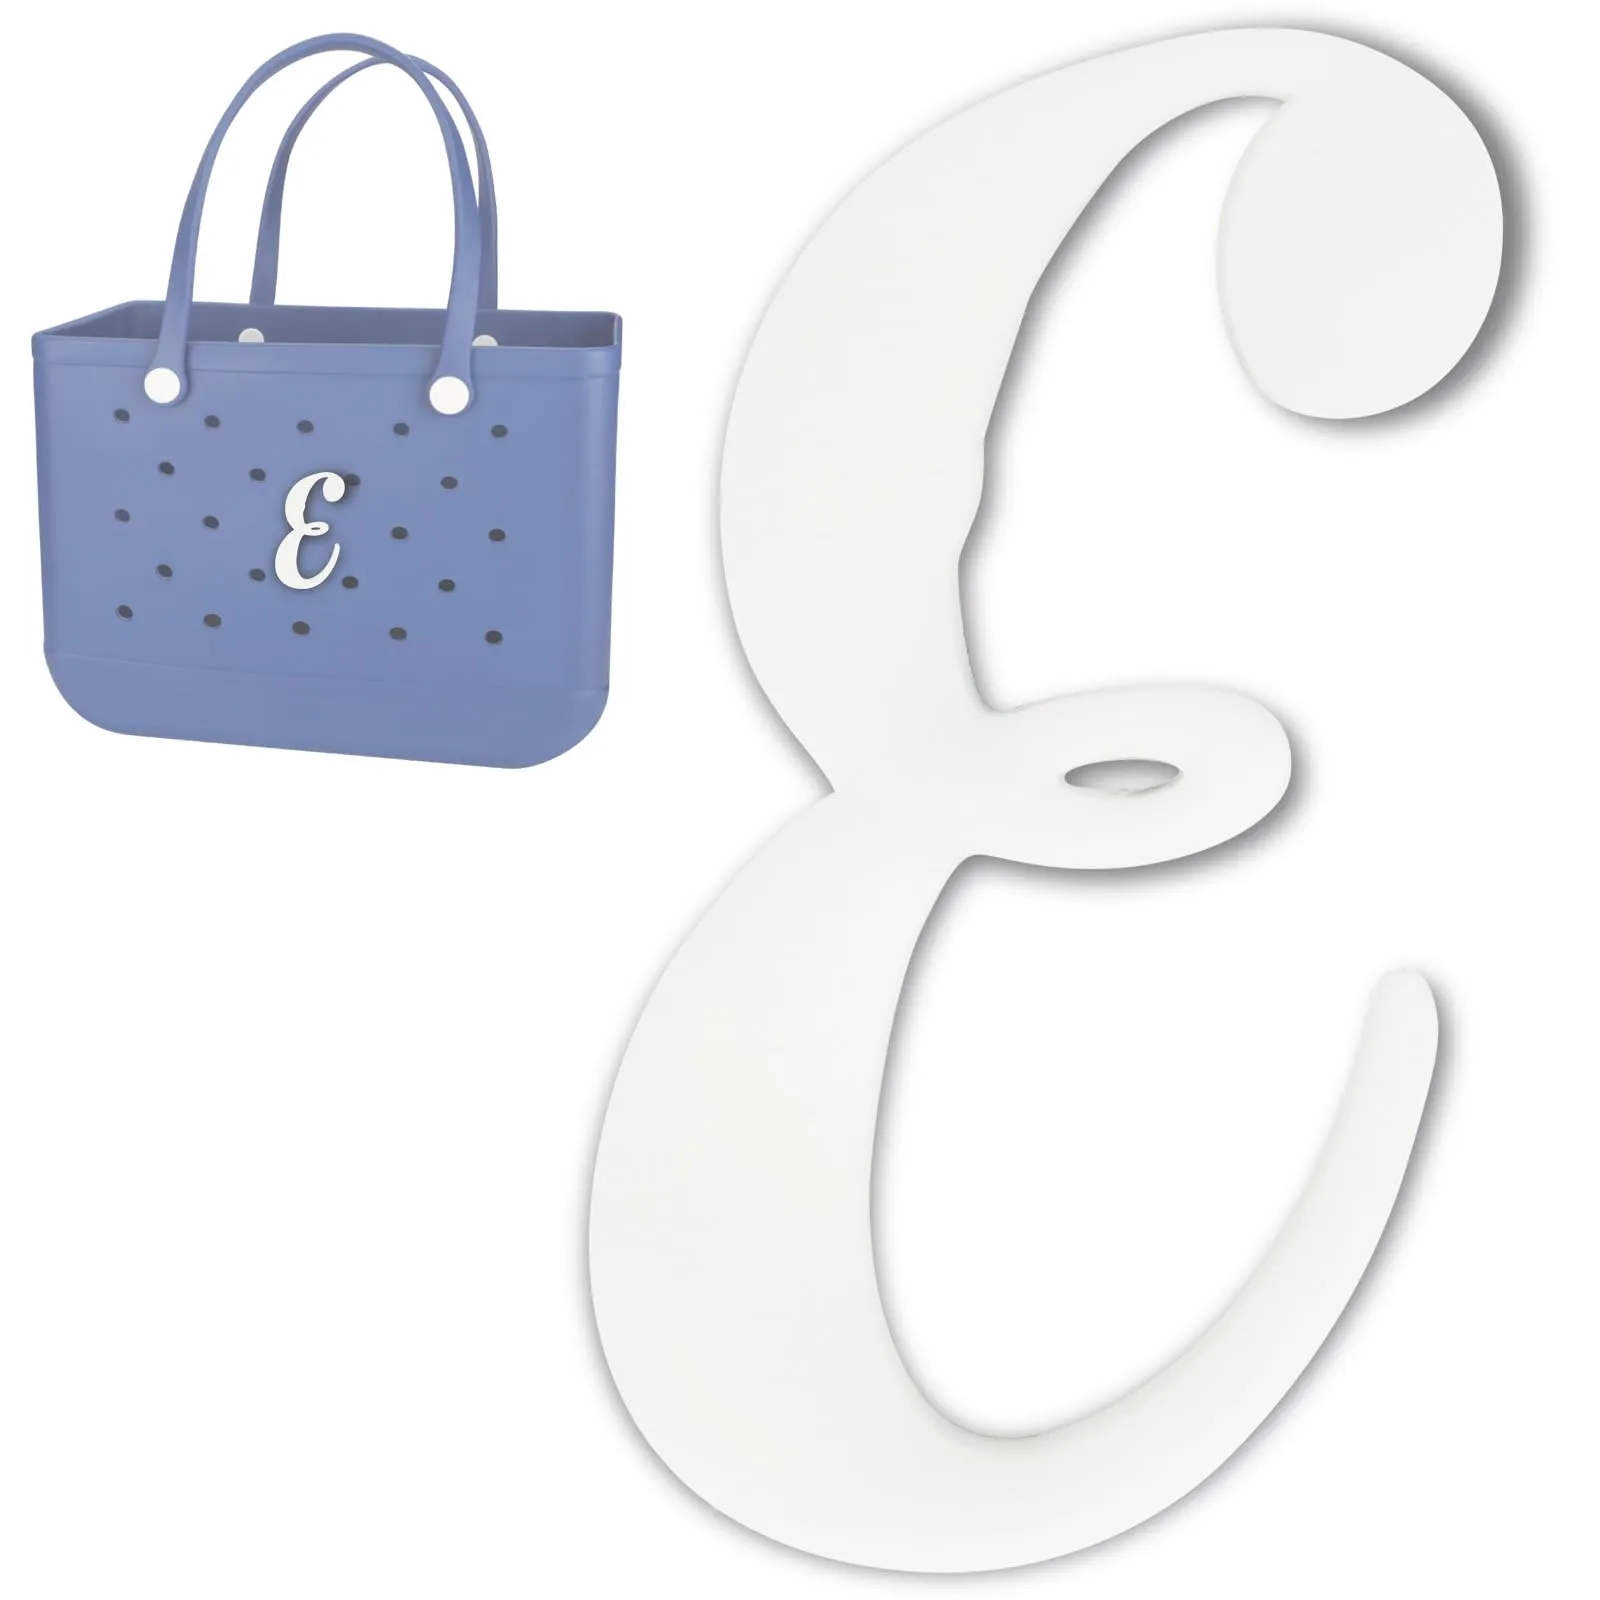 decorative alphabet letteringr accessories compatible with bogg bags charm inserts for bogg bag personalize your tote bag with alphabet letters white